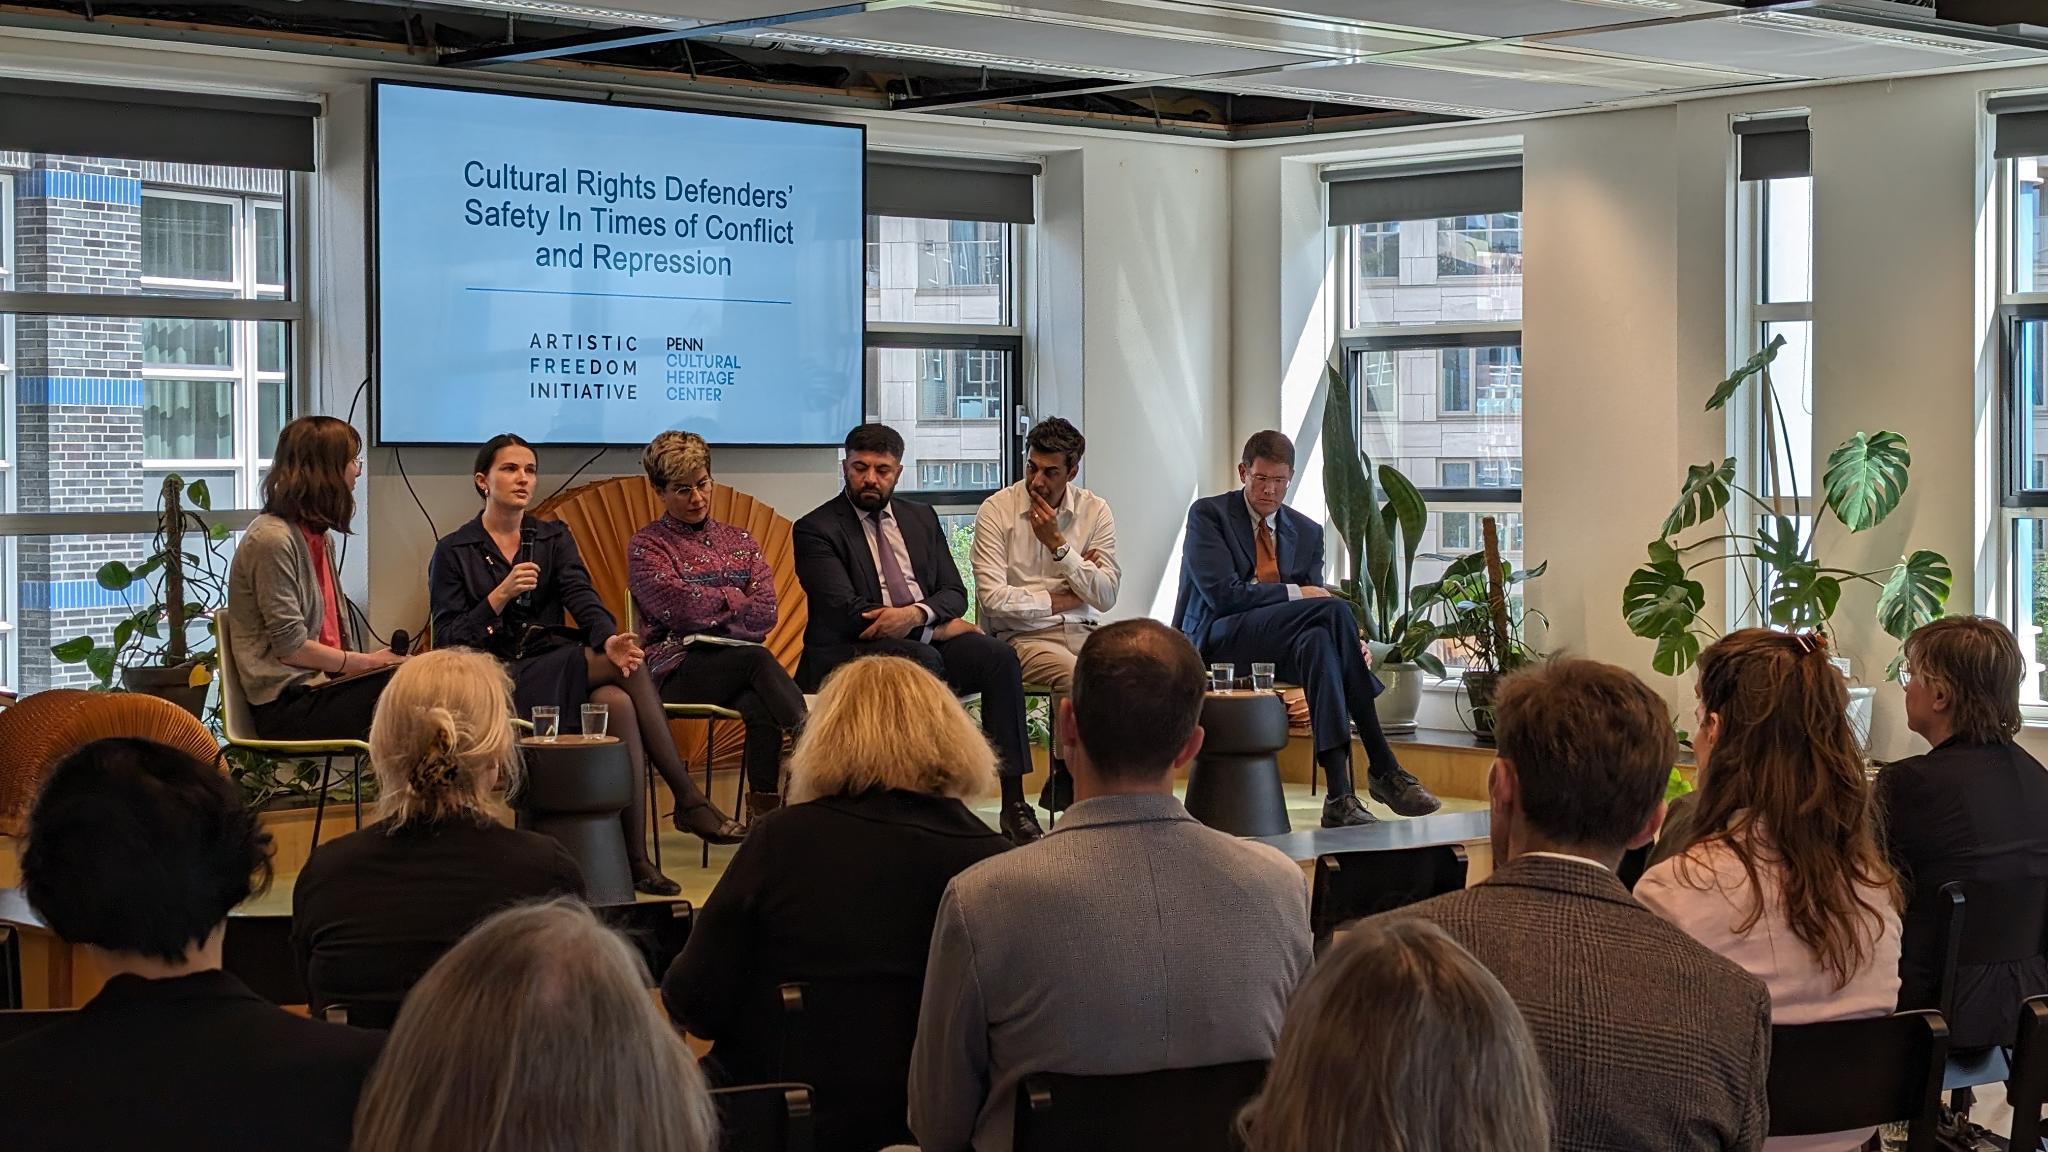 Panel discussion on "Cultural Rights Defenders' Safety in Times of Conflict and Repression" taking place in a conference room with six speakers seated in front of a large window, addressing an attentive audience.